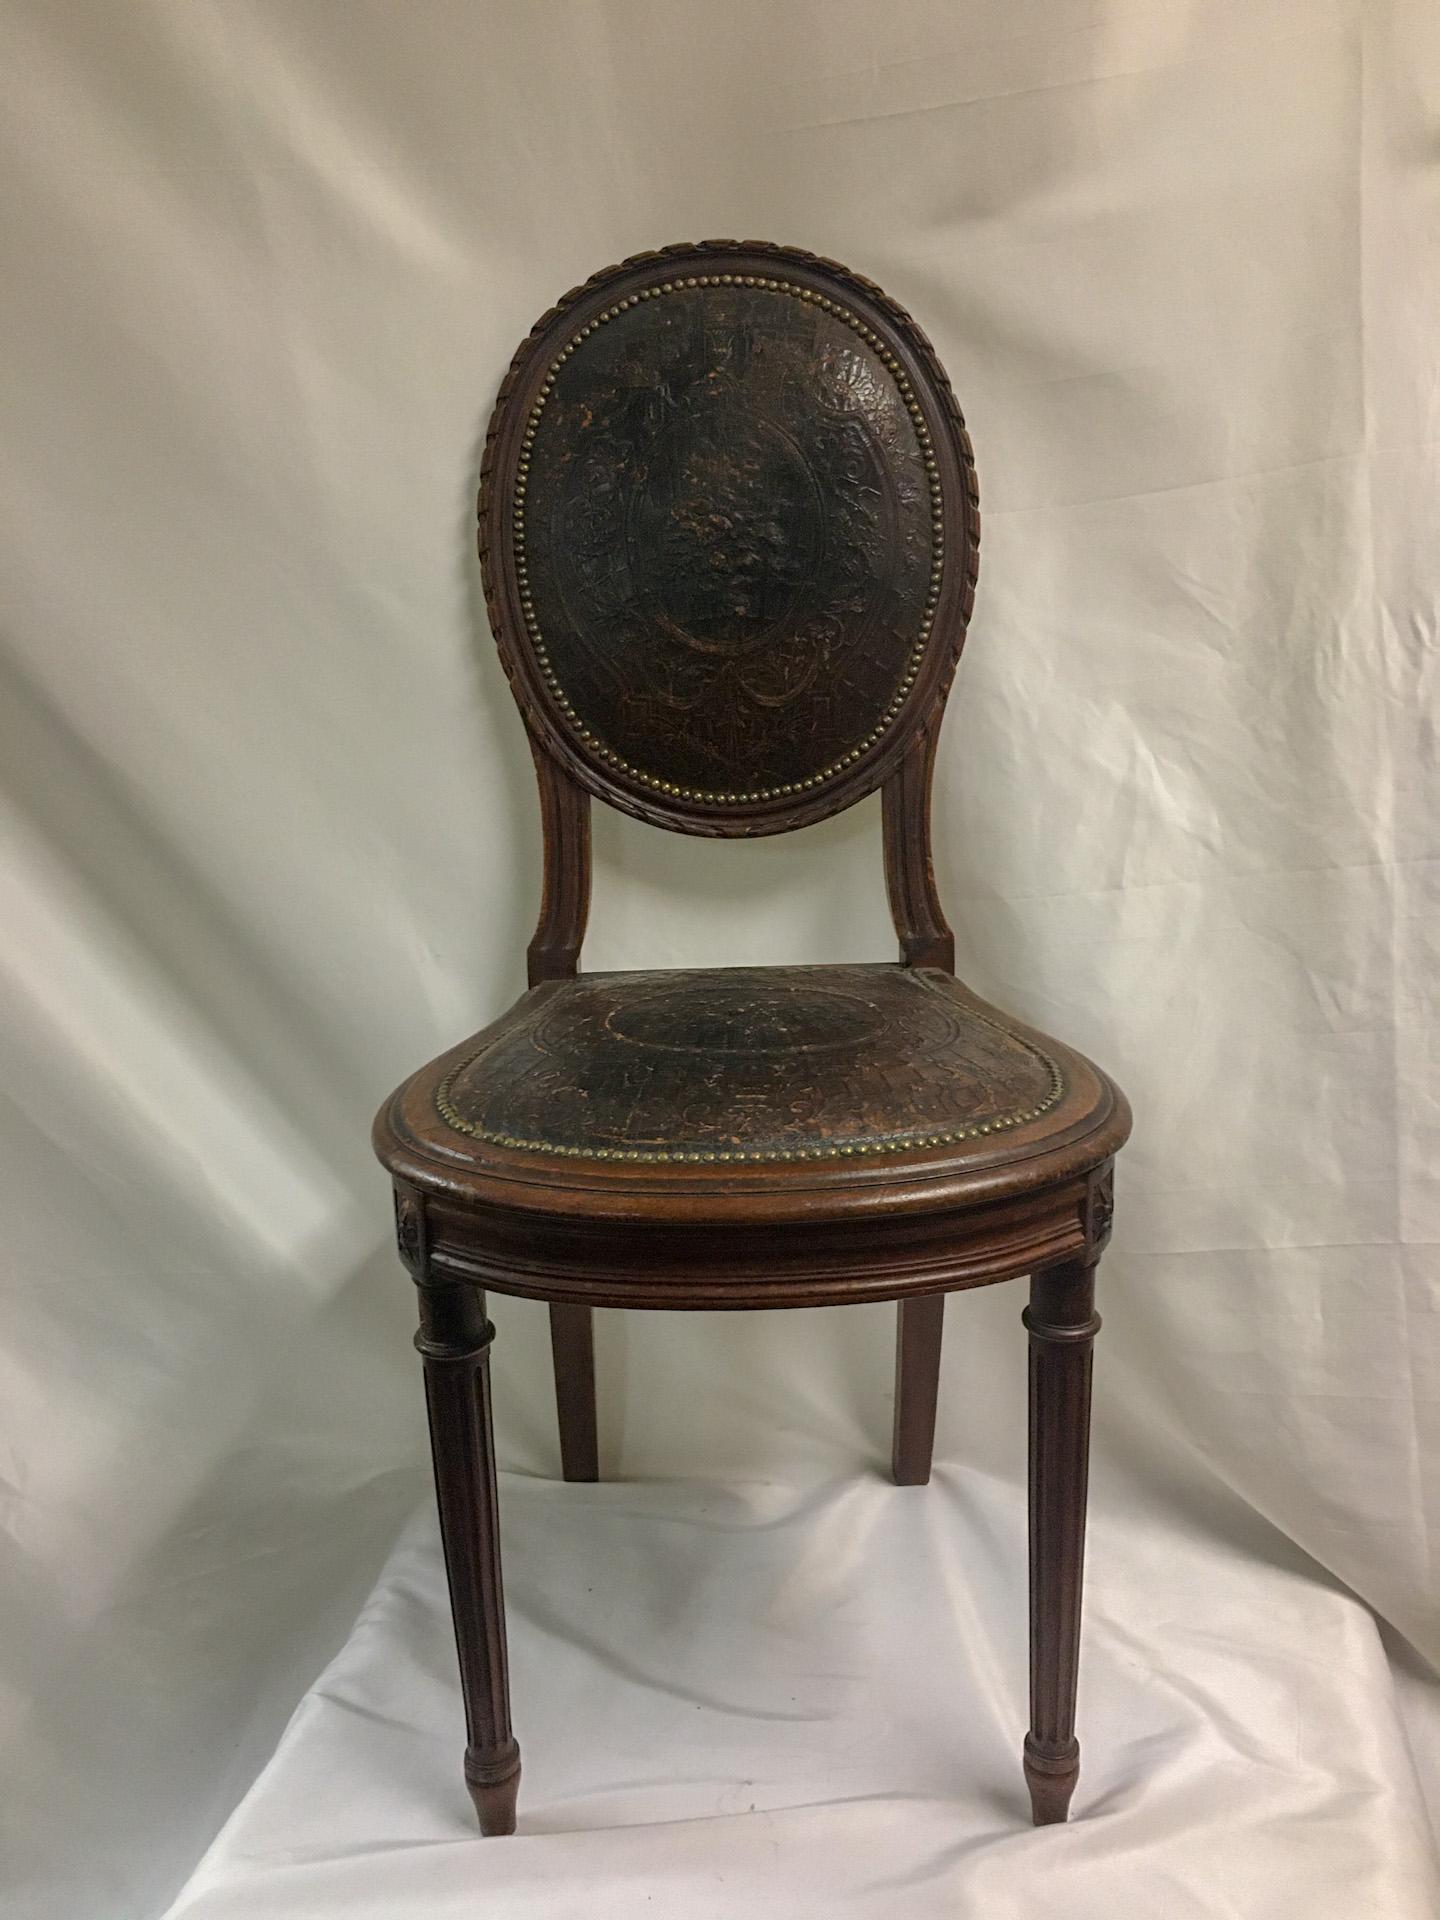 This handsome set of four petite Napoleon III French oak chairs feature embossed leather backs and seats framed in a myriad of brass tacks. The worn  leather adds to the charm of this sturdy and very detailed set. The leather pattern is of a basket